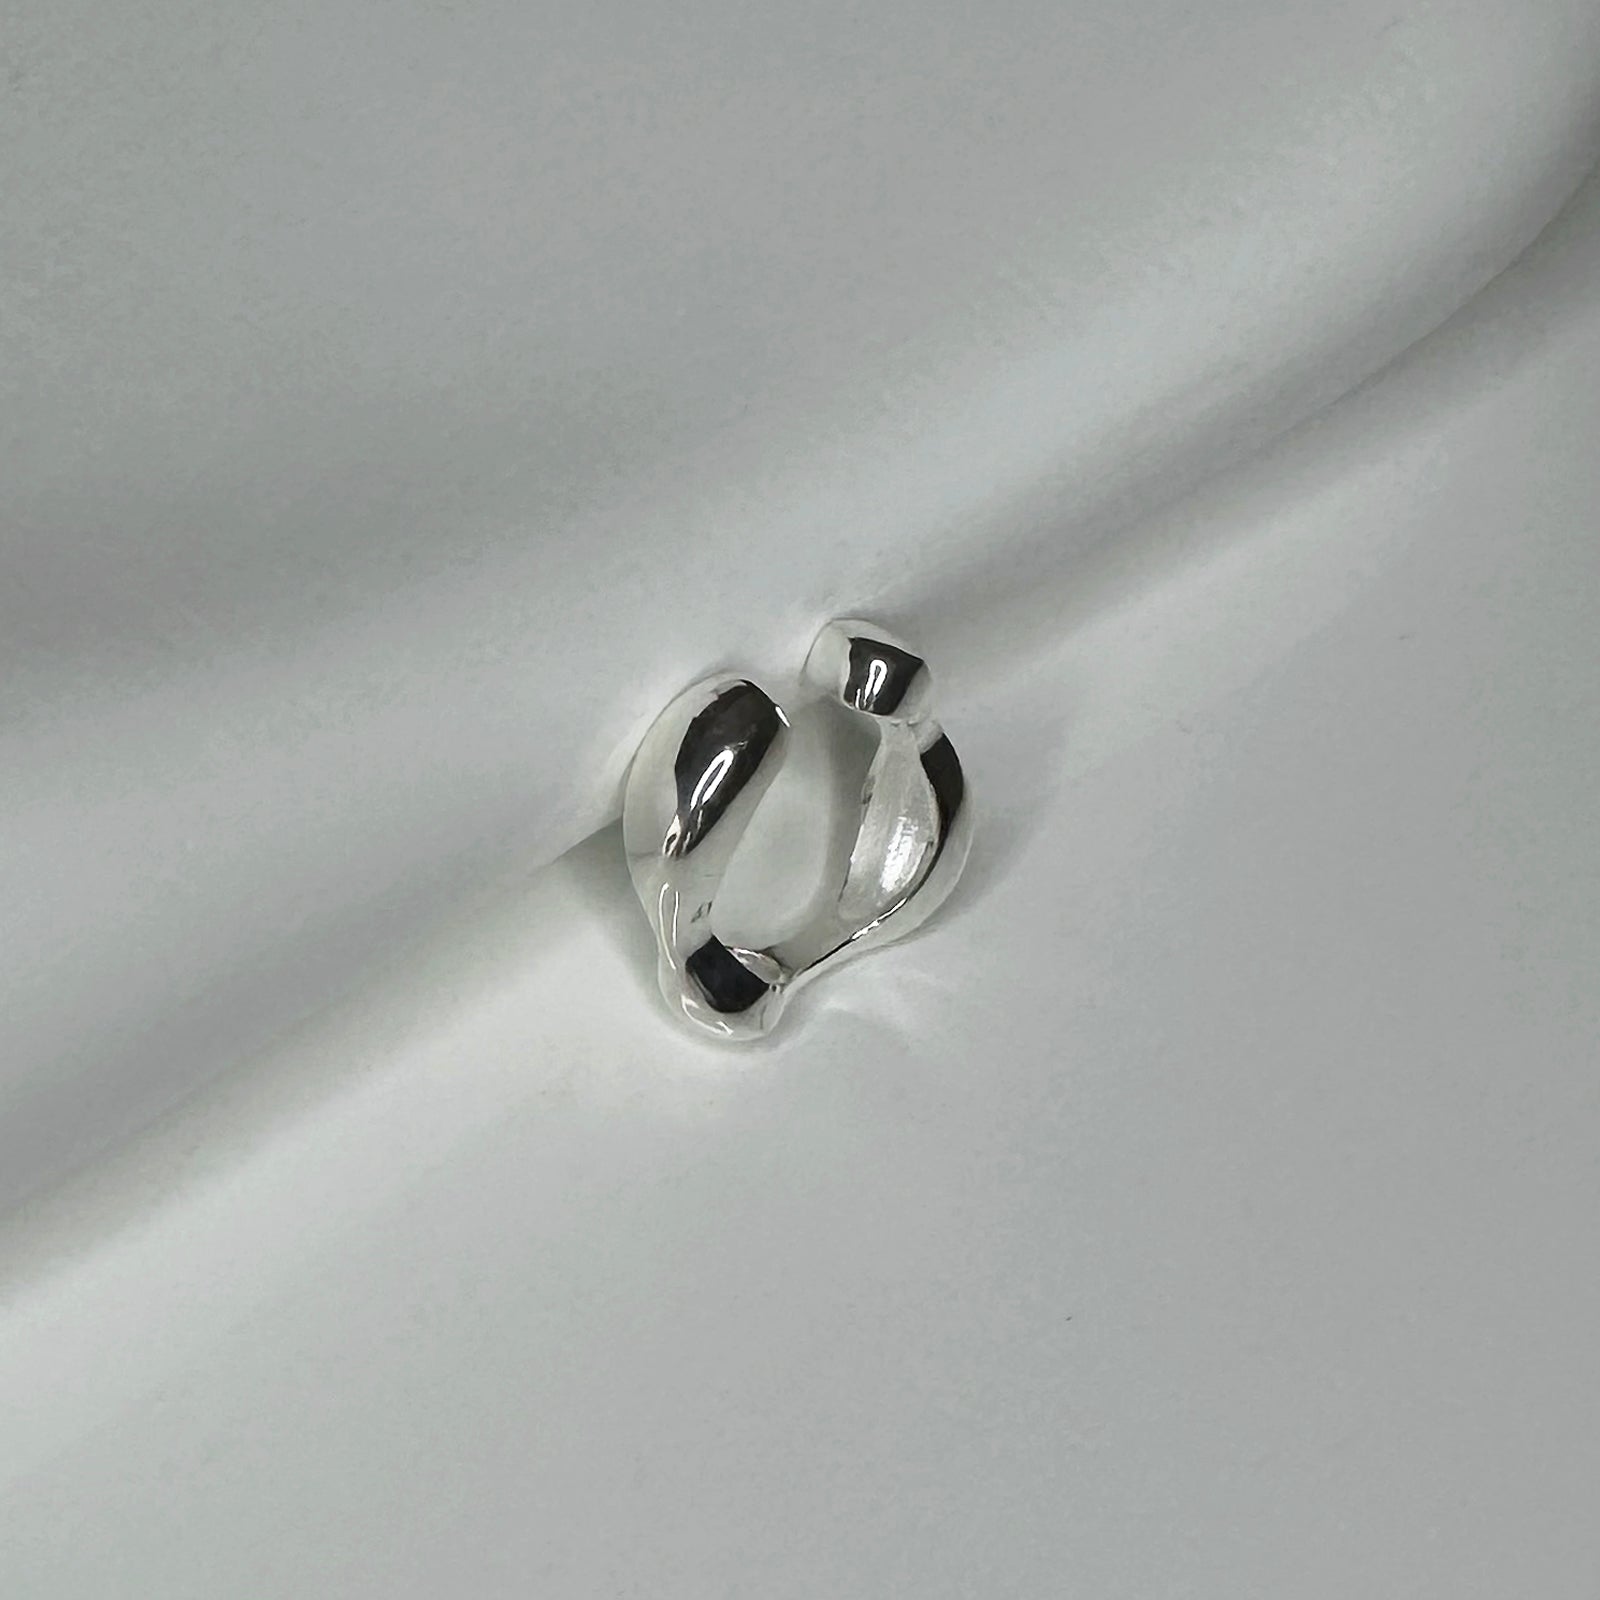 Top view of Square Bubble Ring. Sterling Silver adjustable ring